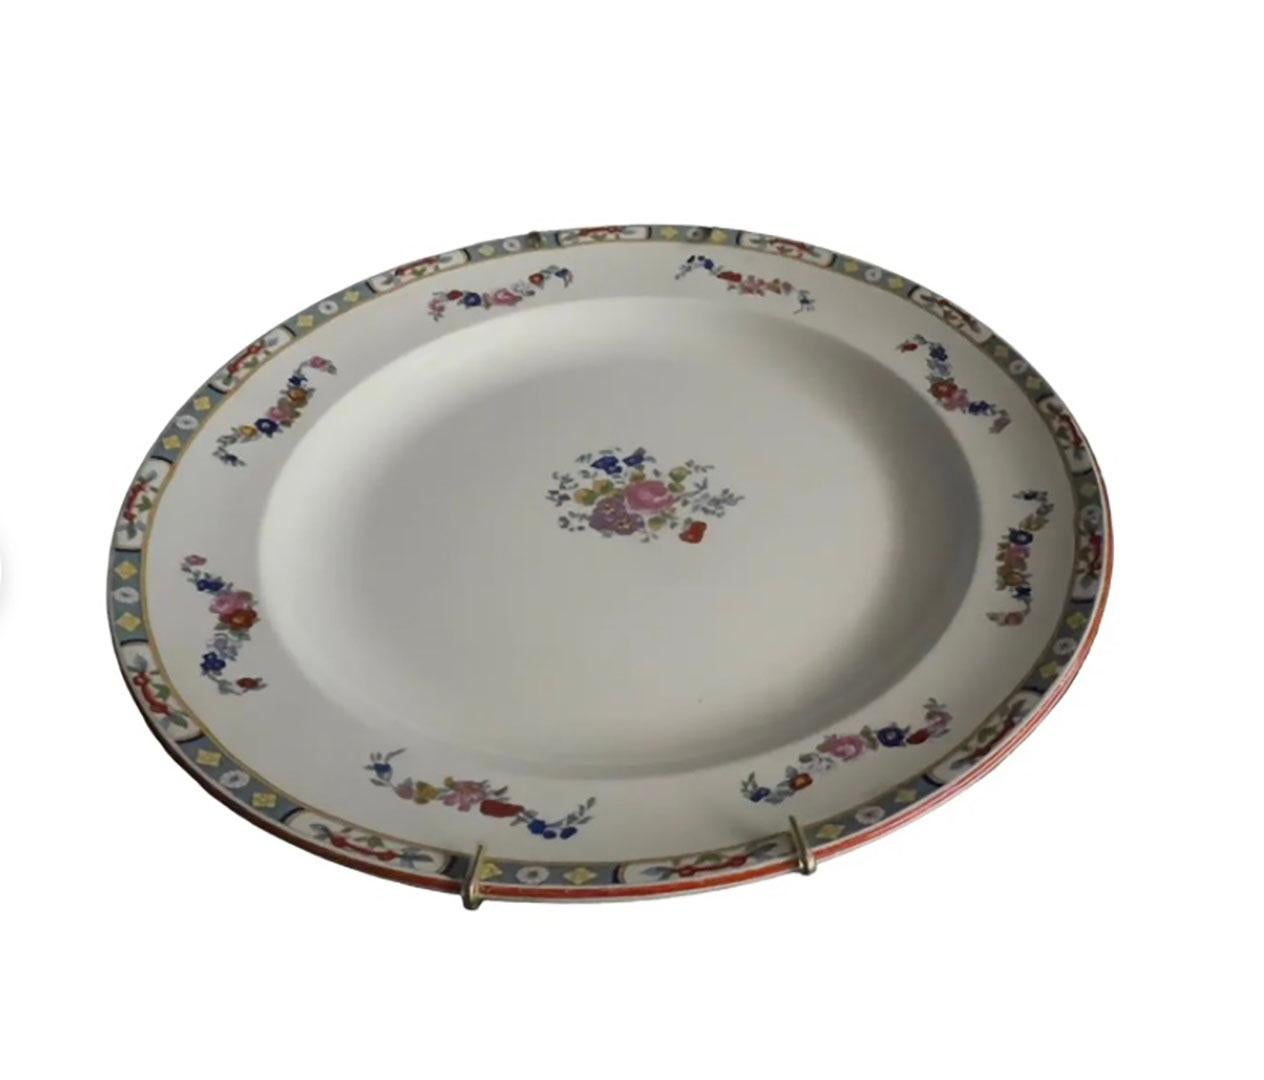 J & G Meakin Hanley England Richmond white round serving platter with floral patter. No mark on back.